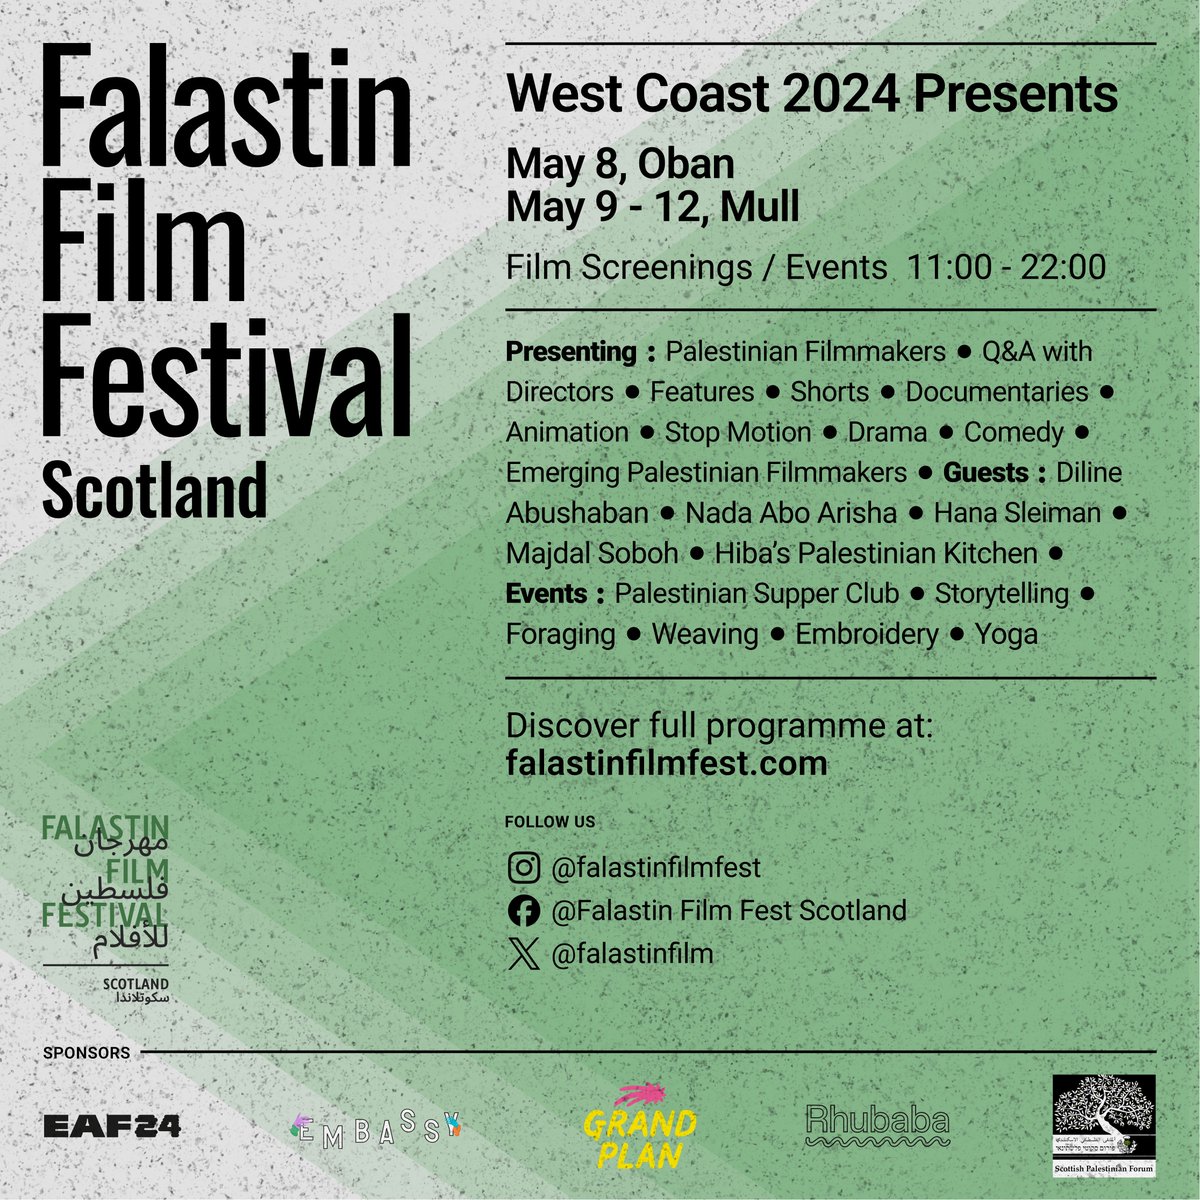 We’re excited to unveil Falastin Film Fest 2024 West Coast programme! Come join us from May 8th to May 12th in Oban and Mull for a lineup of screenings and events. Visit falastinfilmfest.com to discover our full programme, and secure your ticket today.